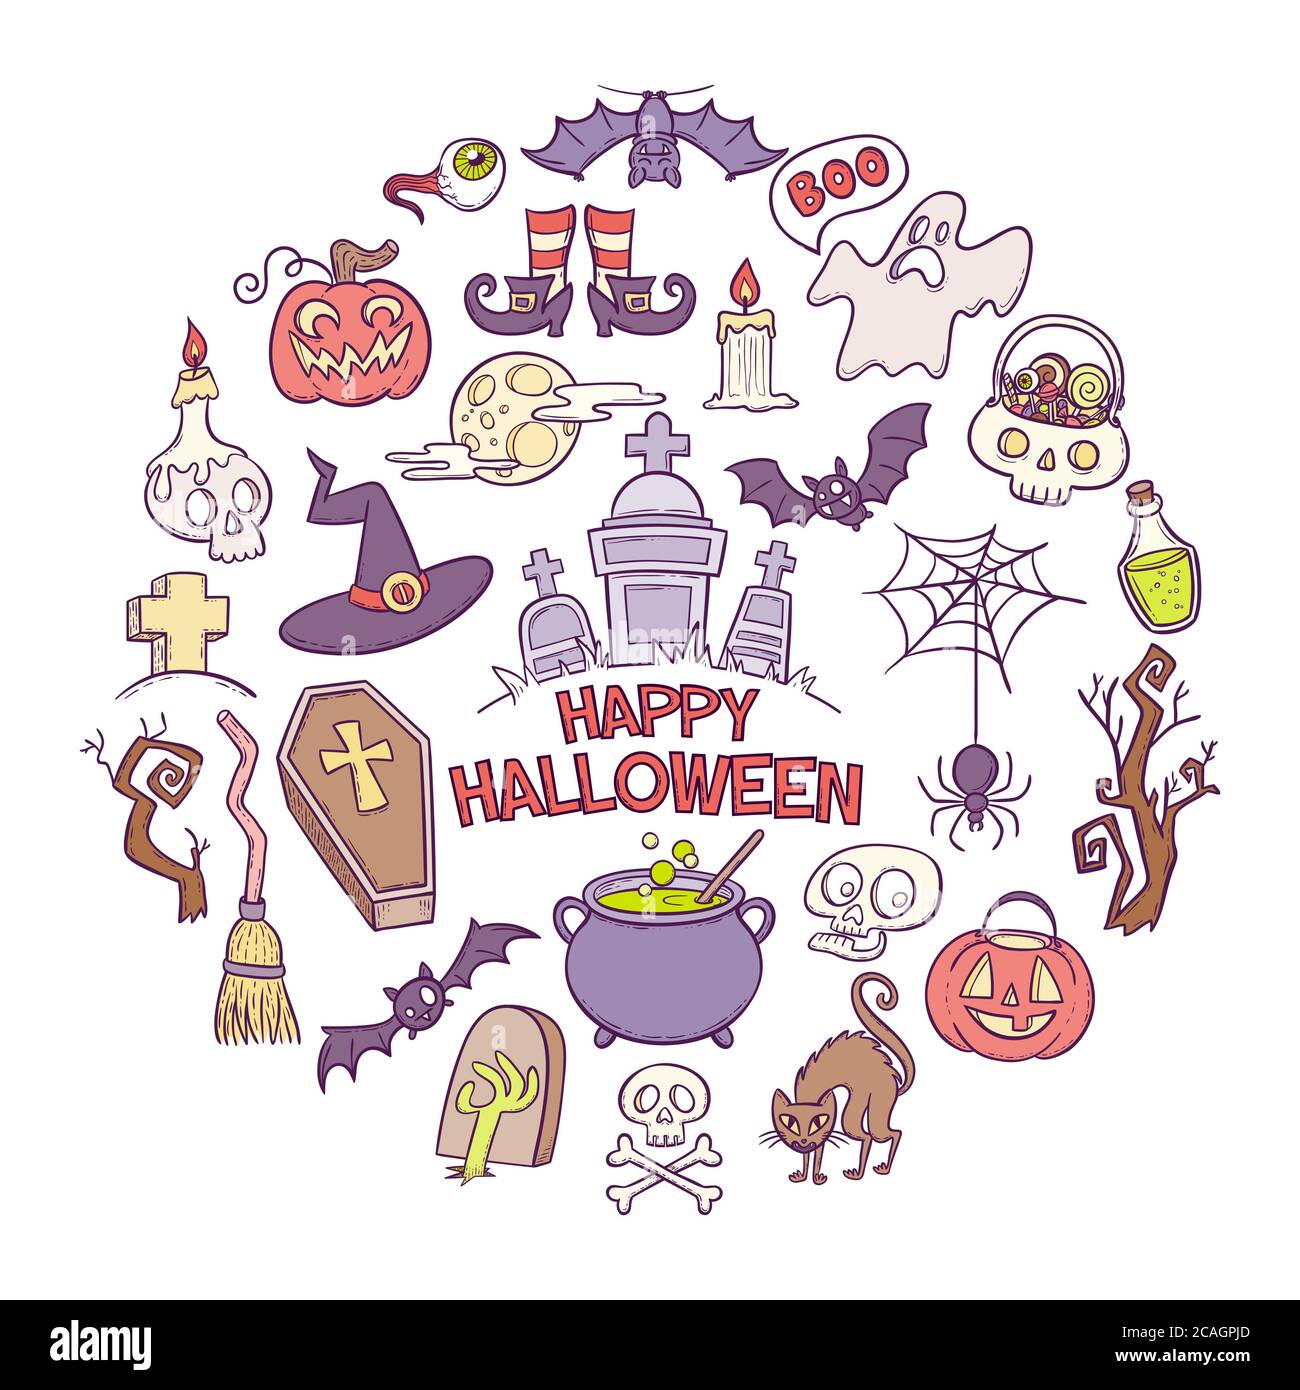 Halloween cartoon elements collection. Cute background with hand drawn cartoon elements of Halloween celebration. Vector illustration isolated on whit Stock Vector